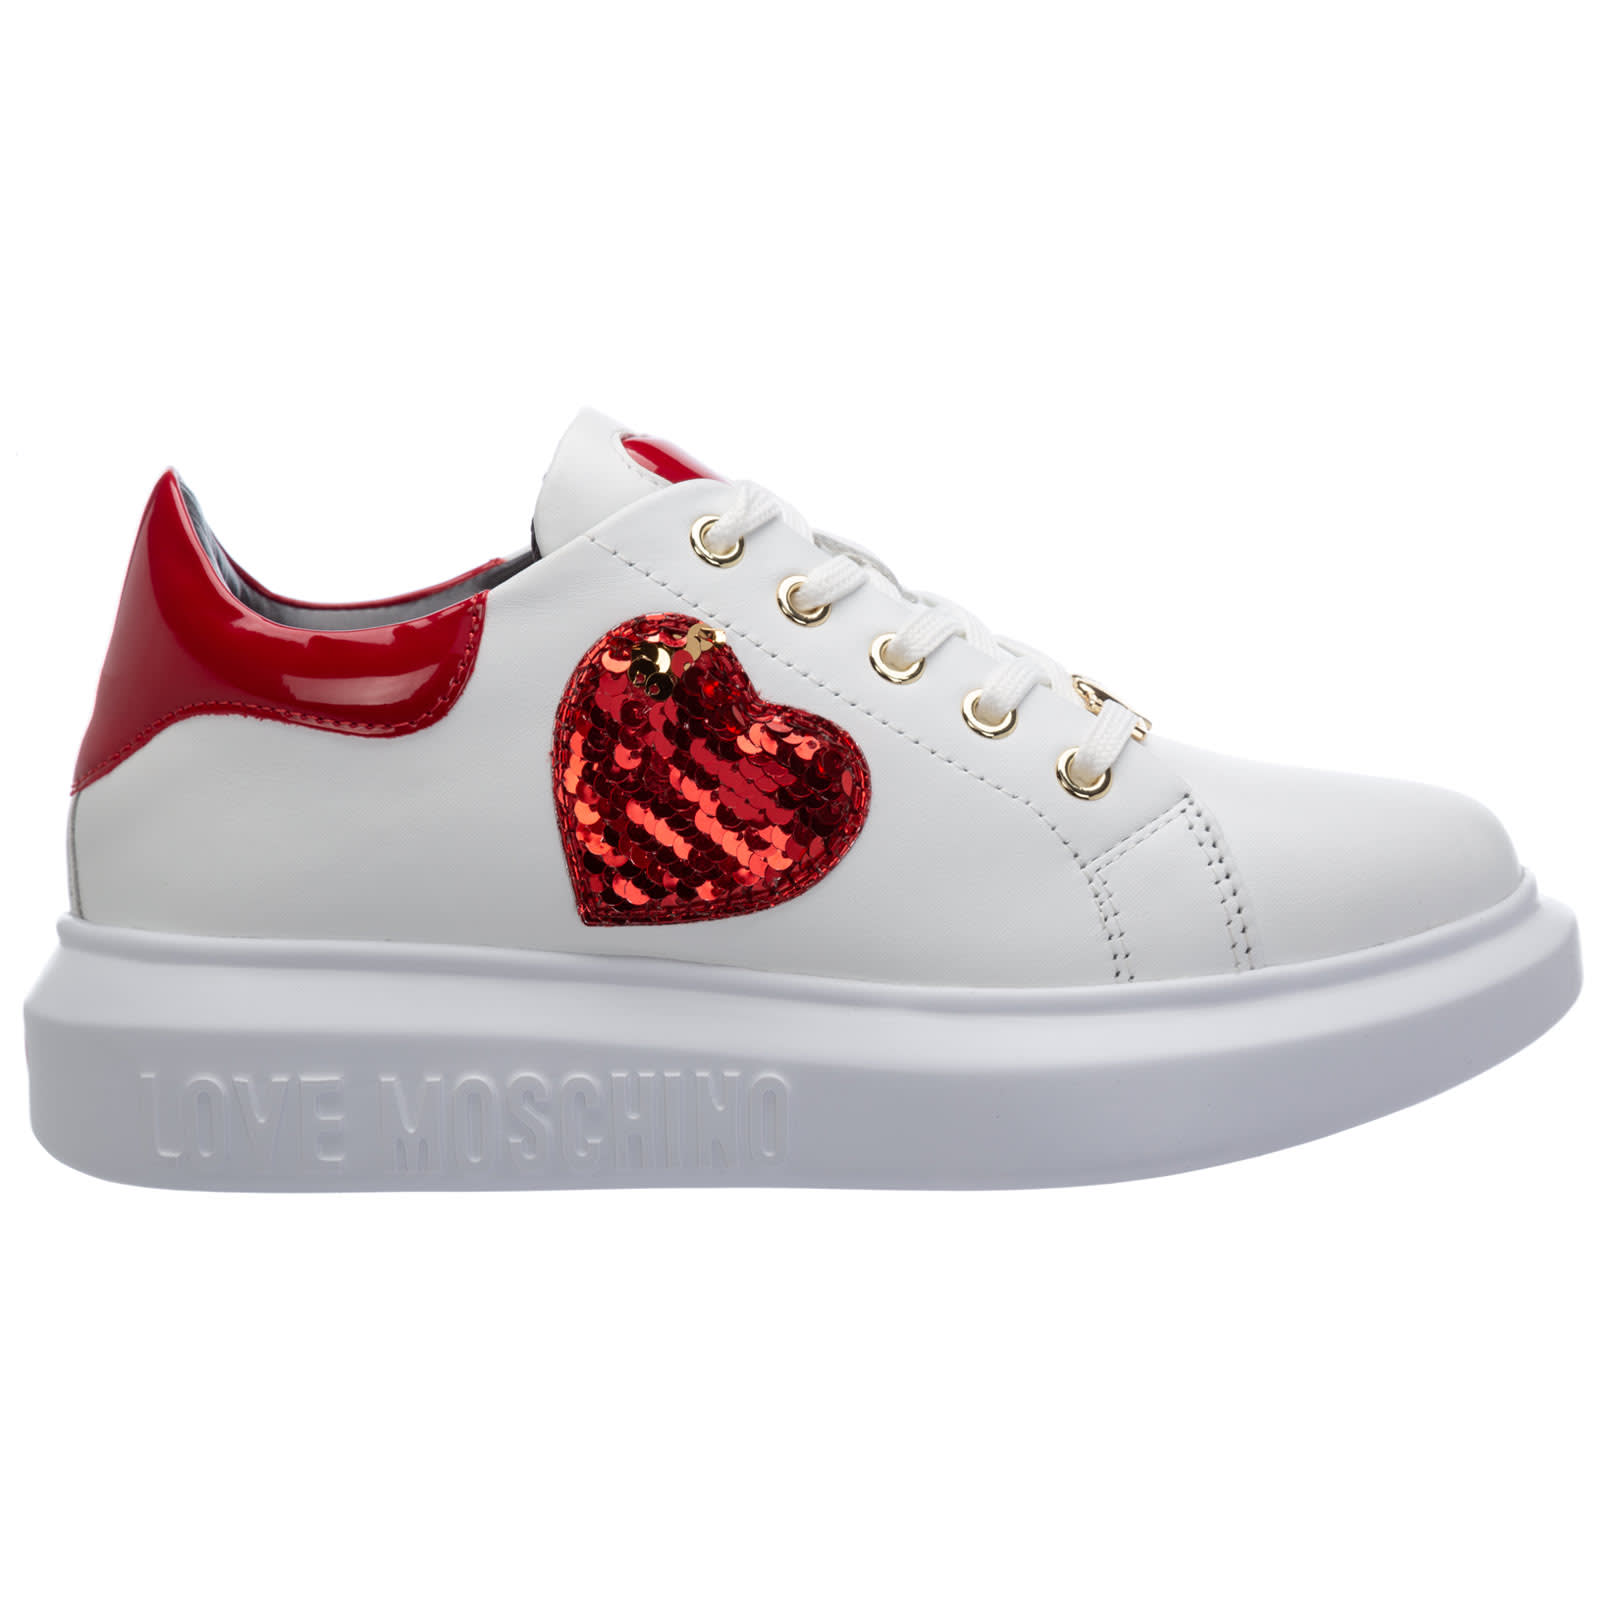 Buy Love Moschino Buffalo Sneakers online, shop Love Moschino shoes with free shipping